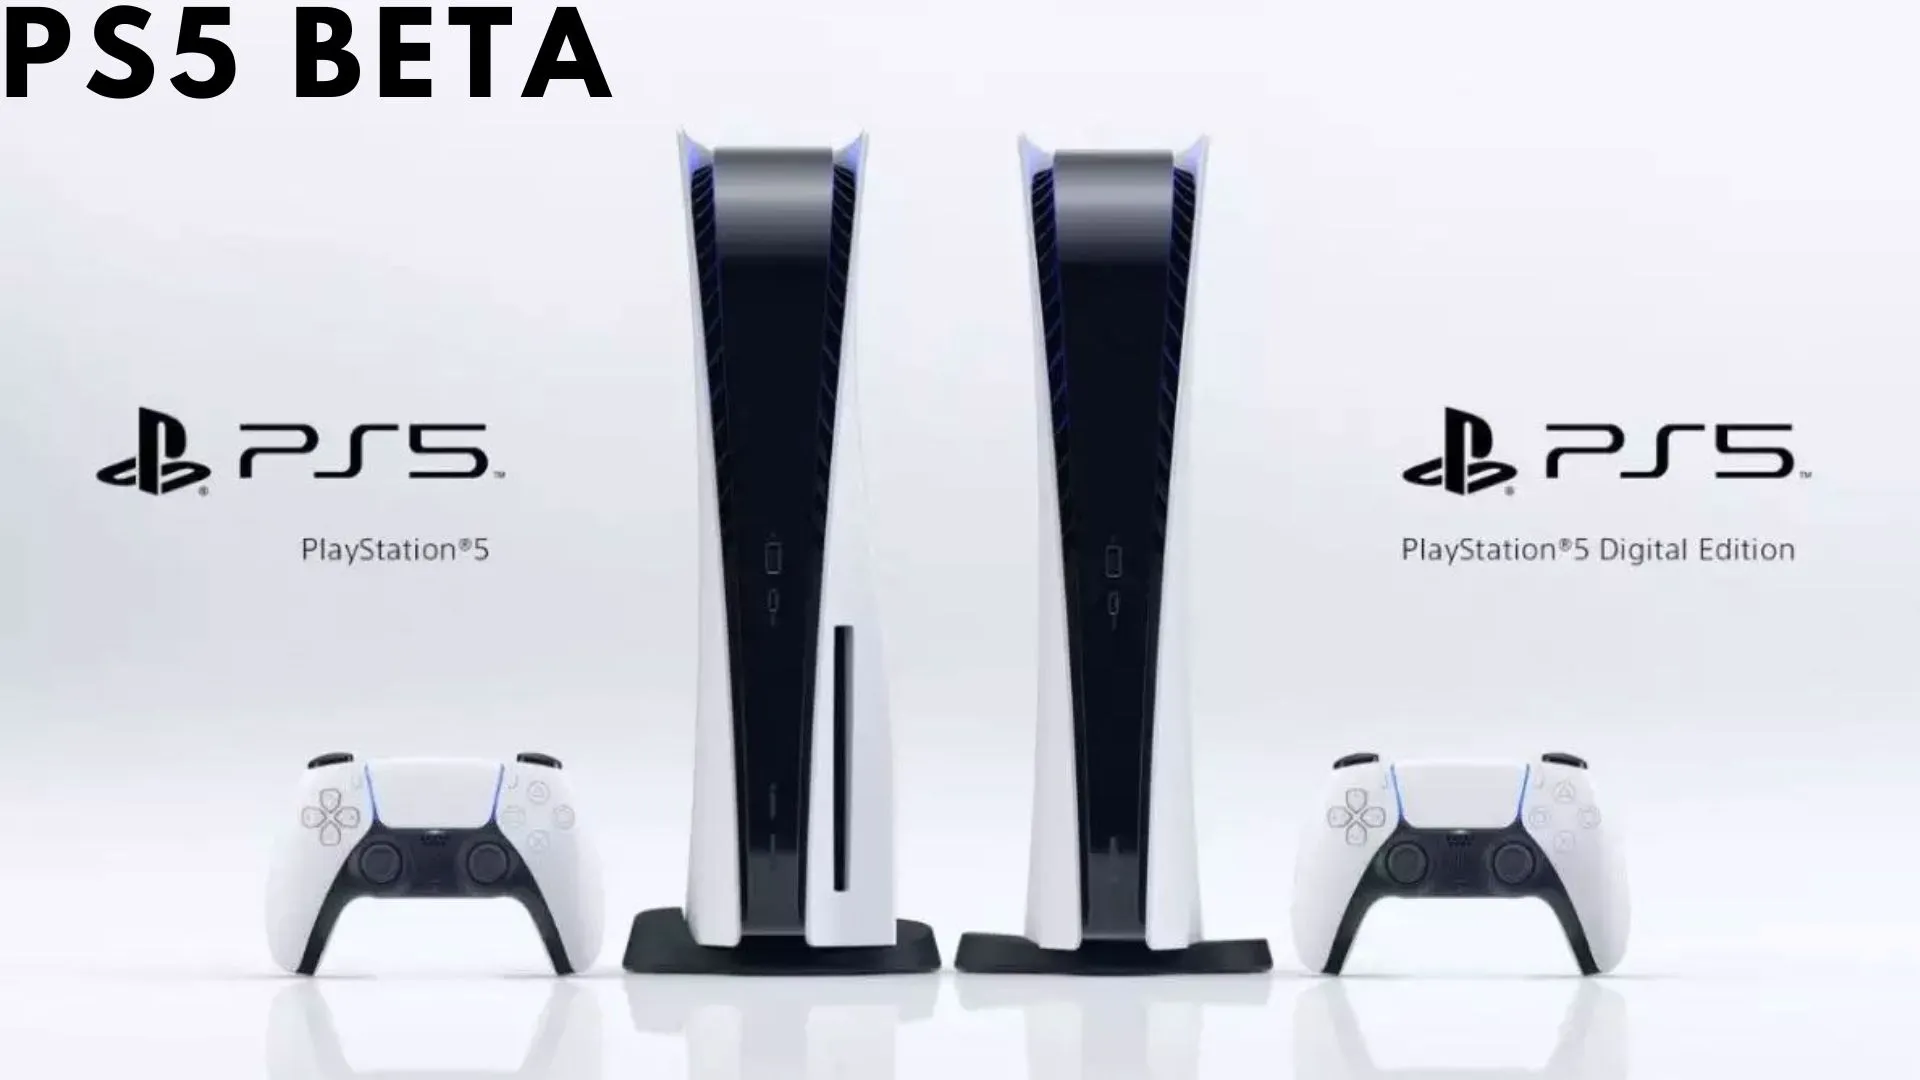 PlayStation 5 Beta introduces new features for testing